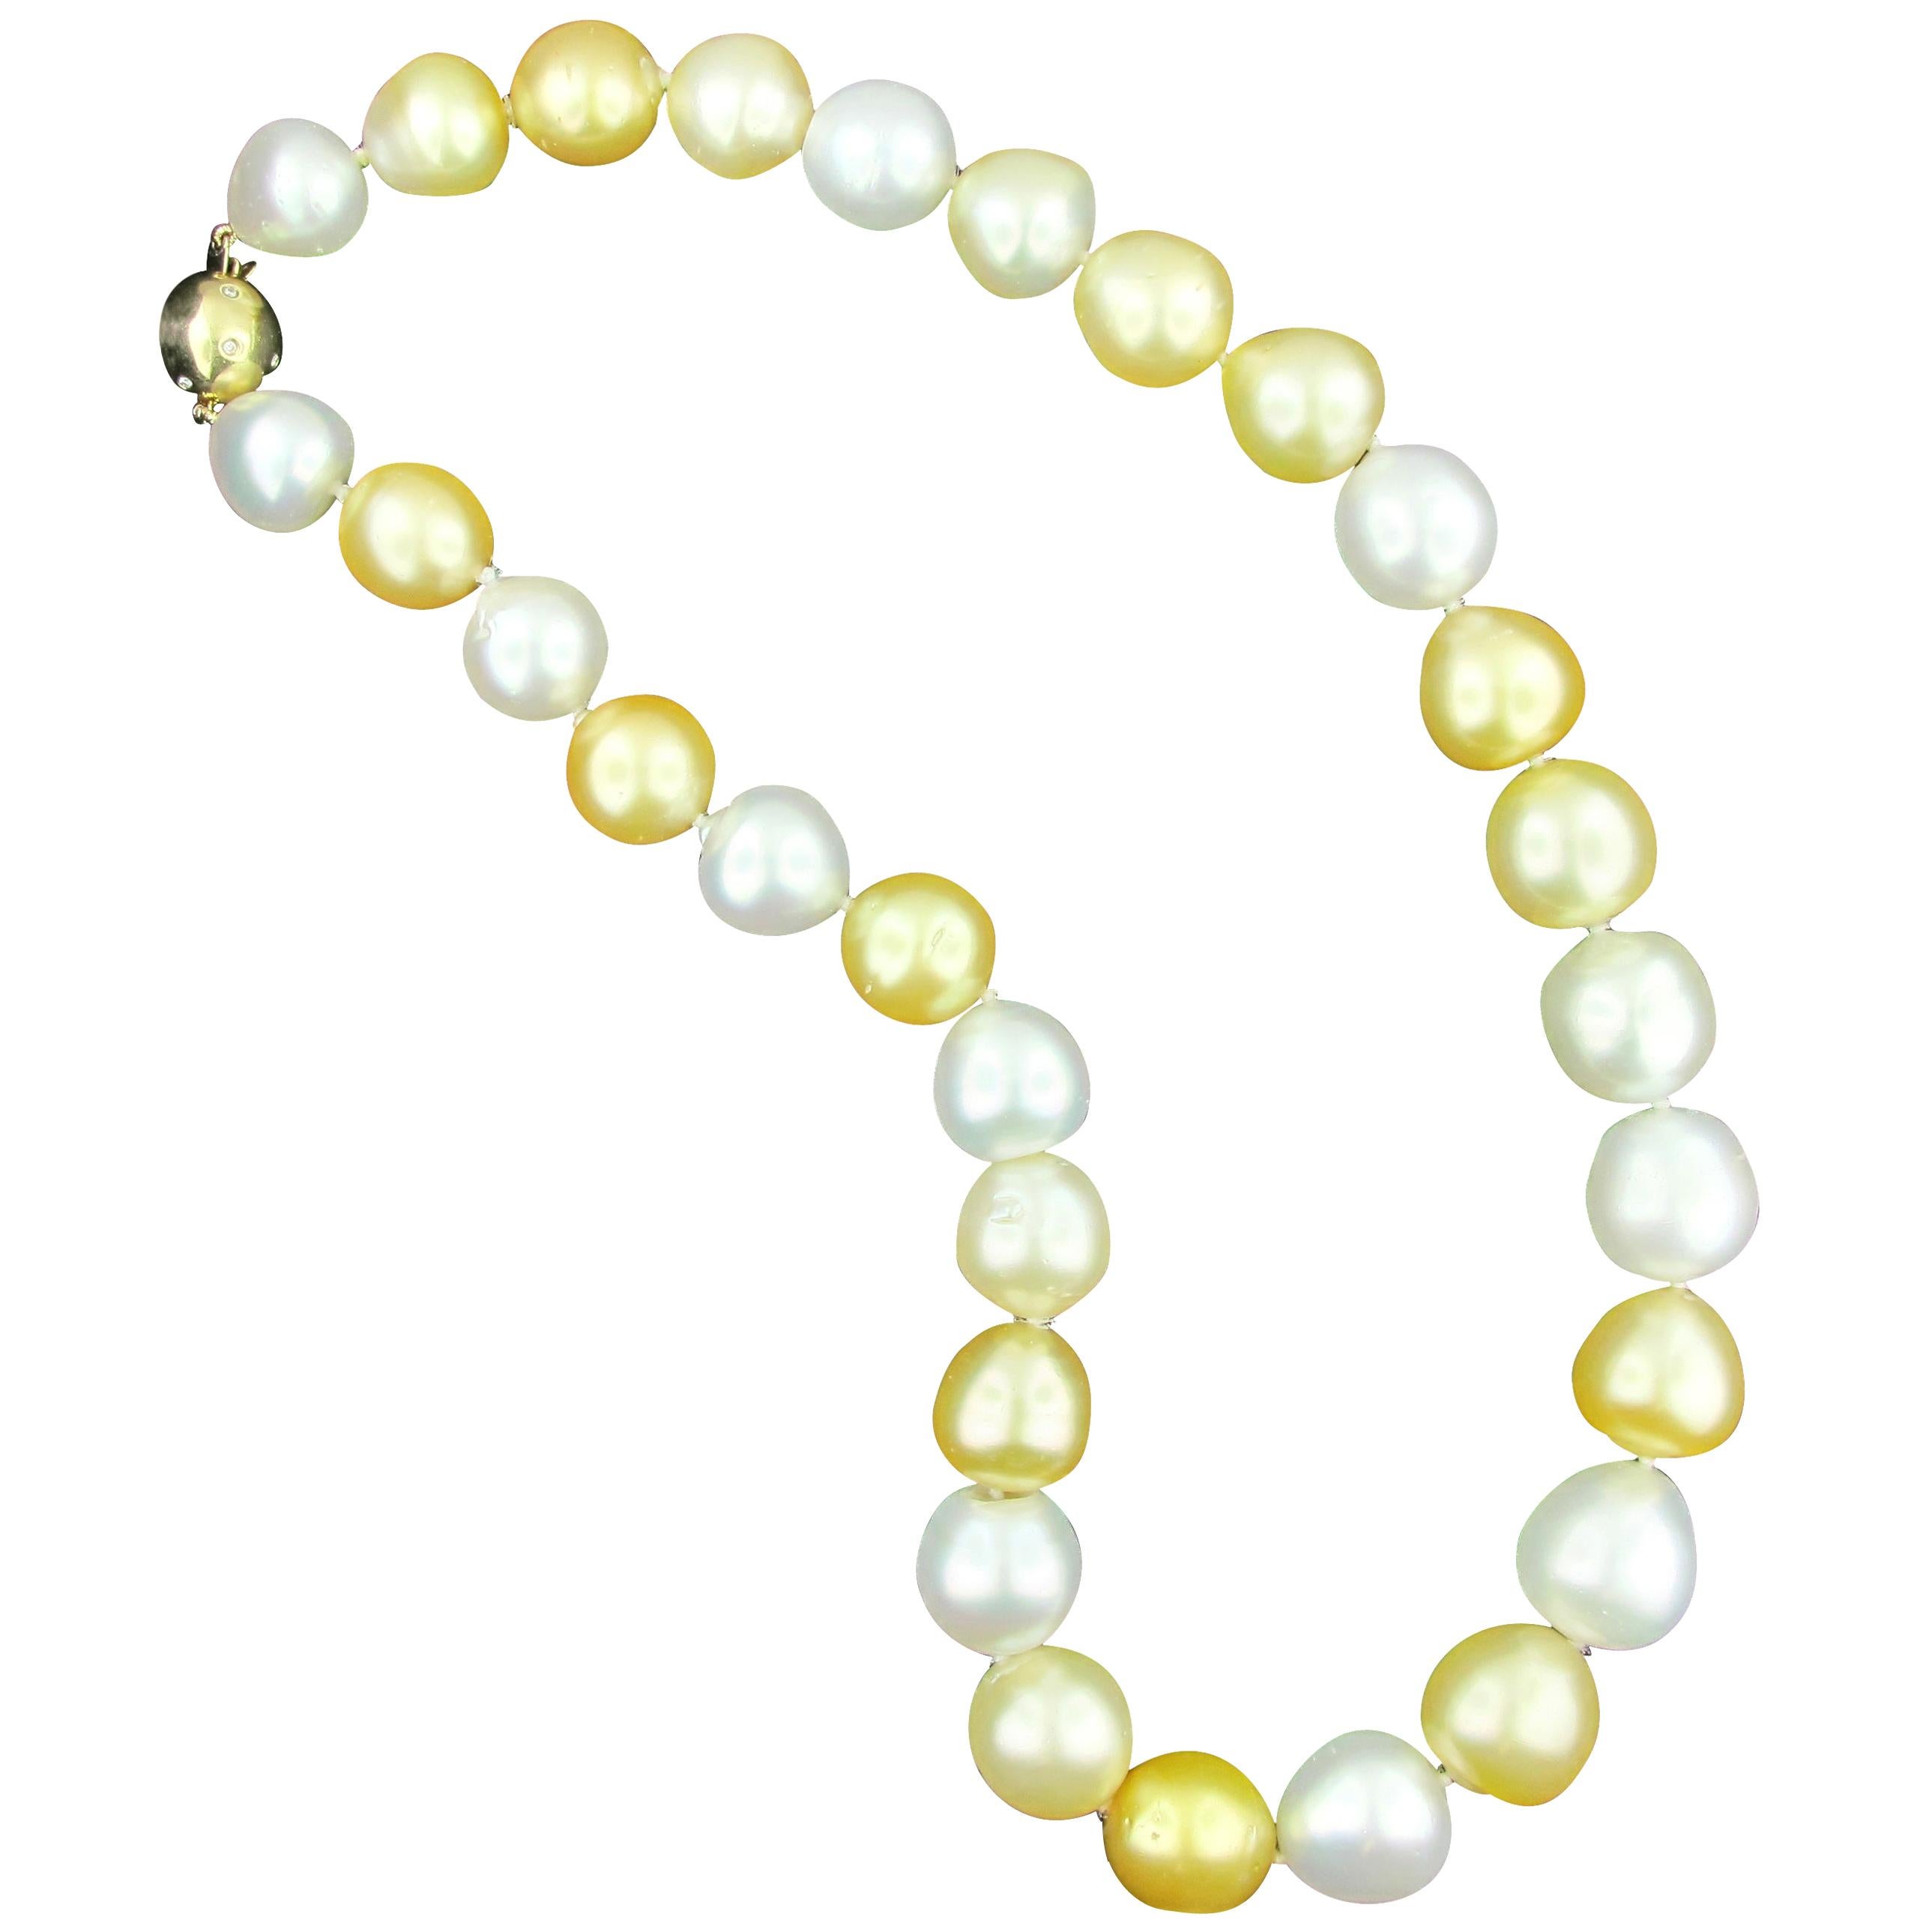 White and Golden South Sea Pearl Necklace with 14 KT Yellow Gold & Diamond Clasp